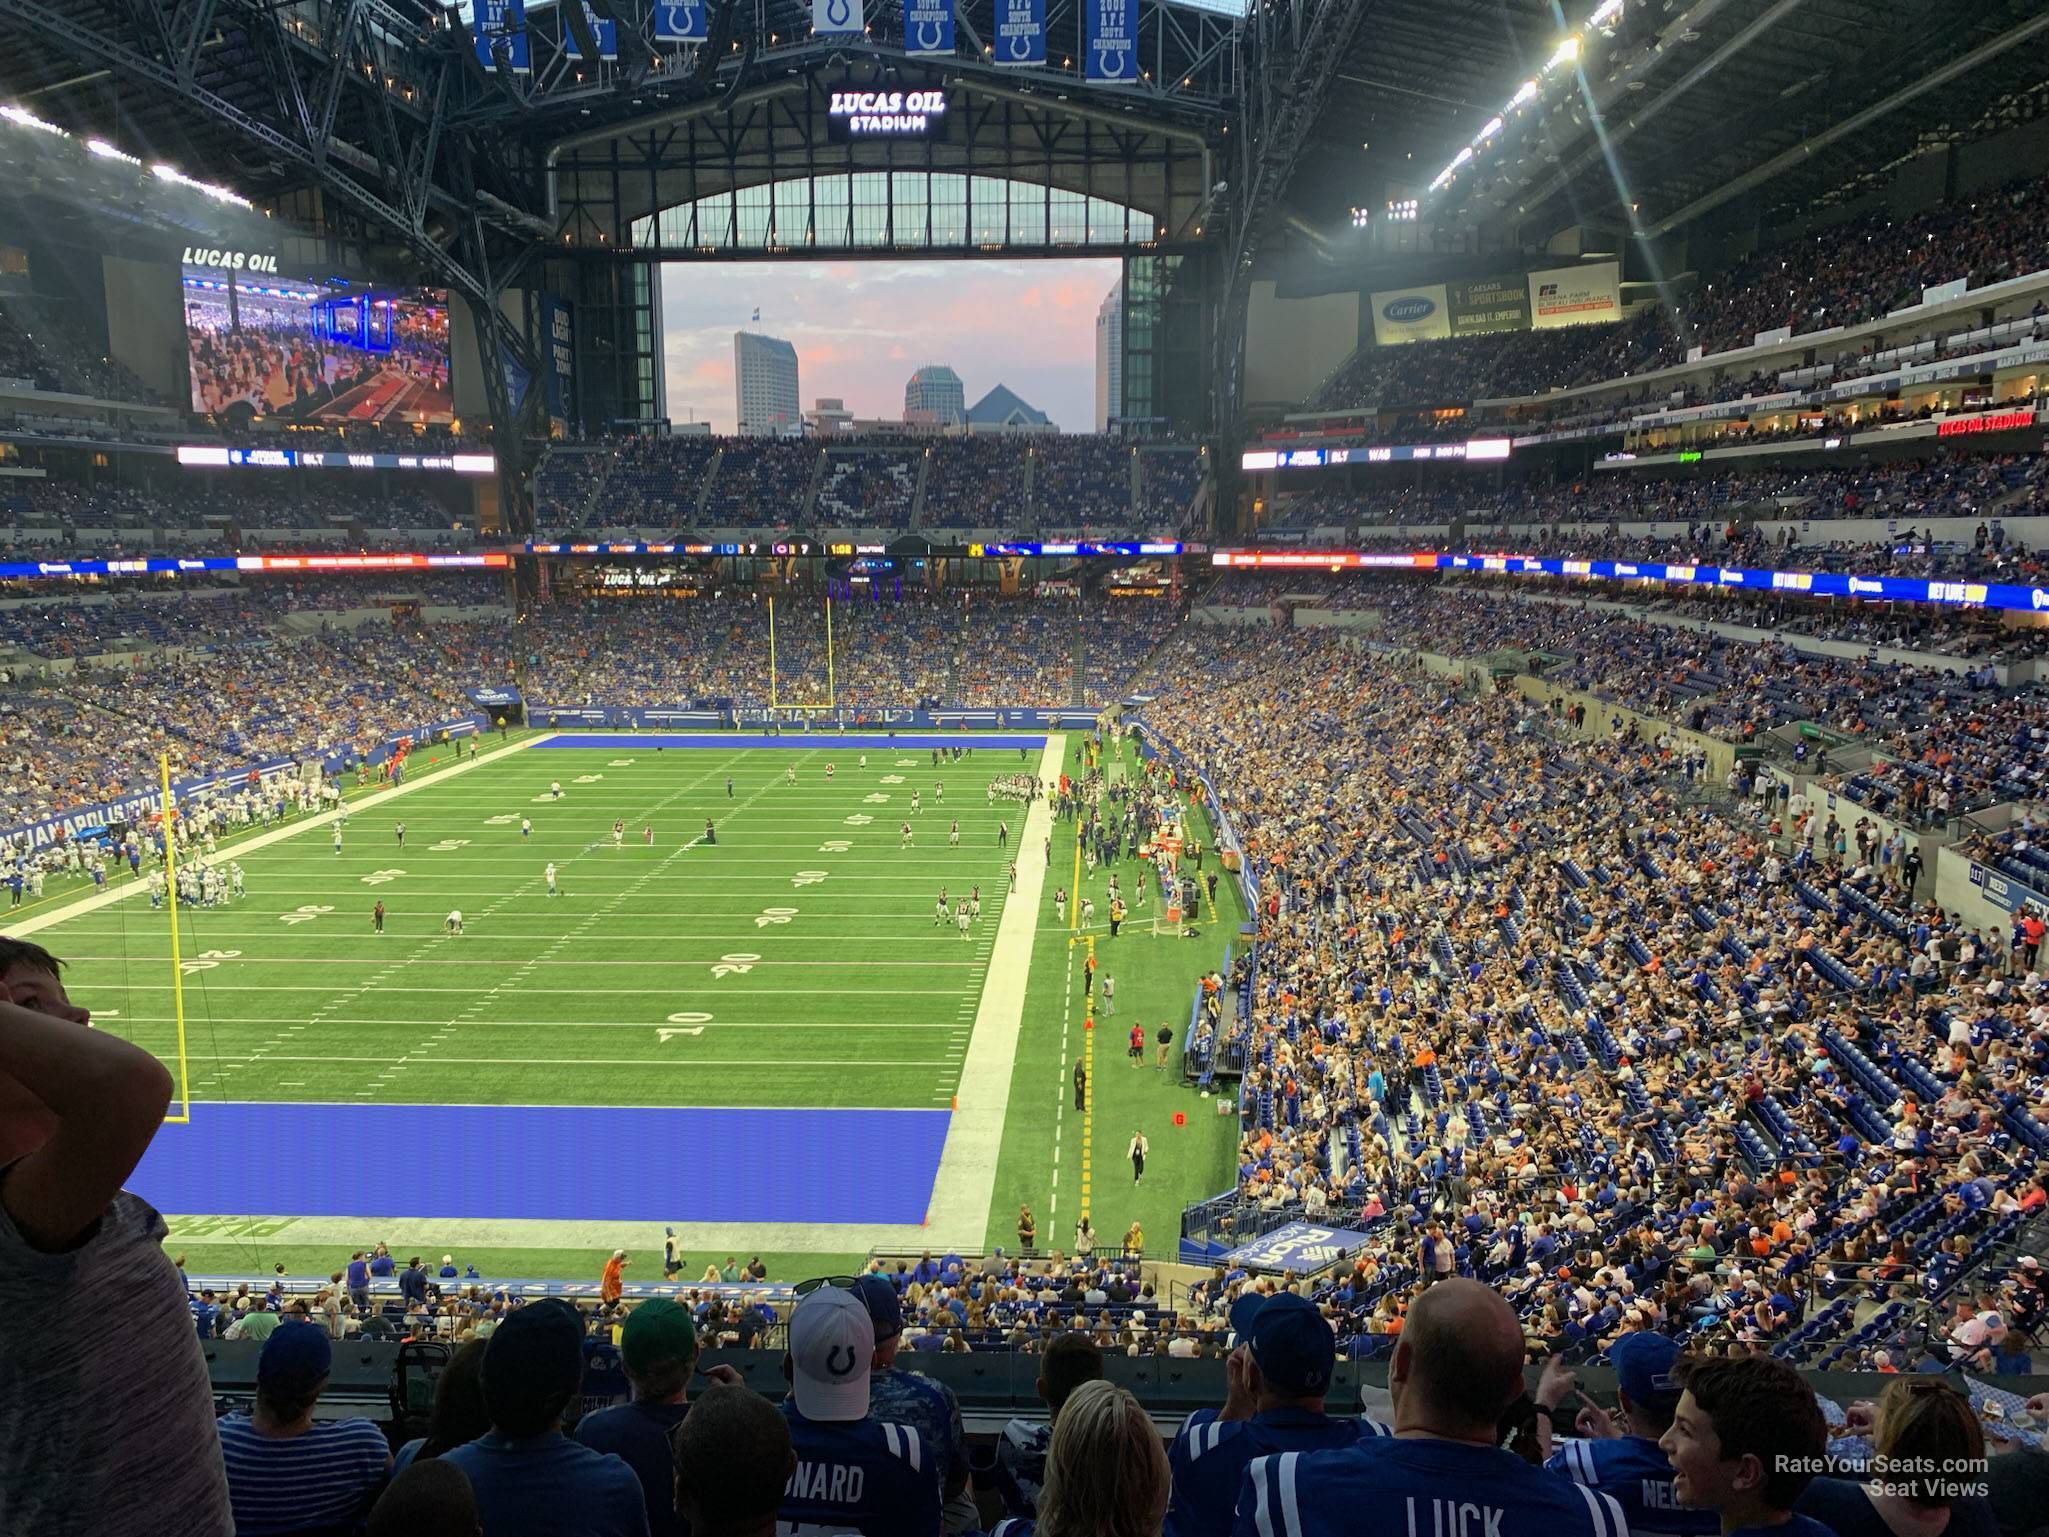 section 324, row 5n seat view  for football - lucas oil stadium